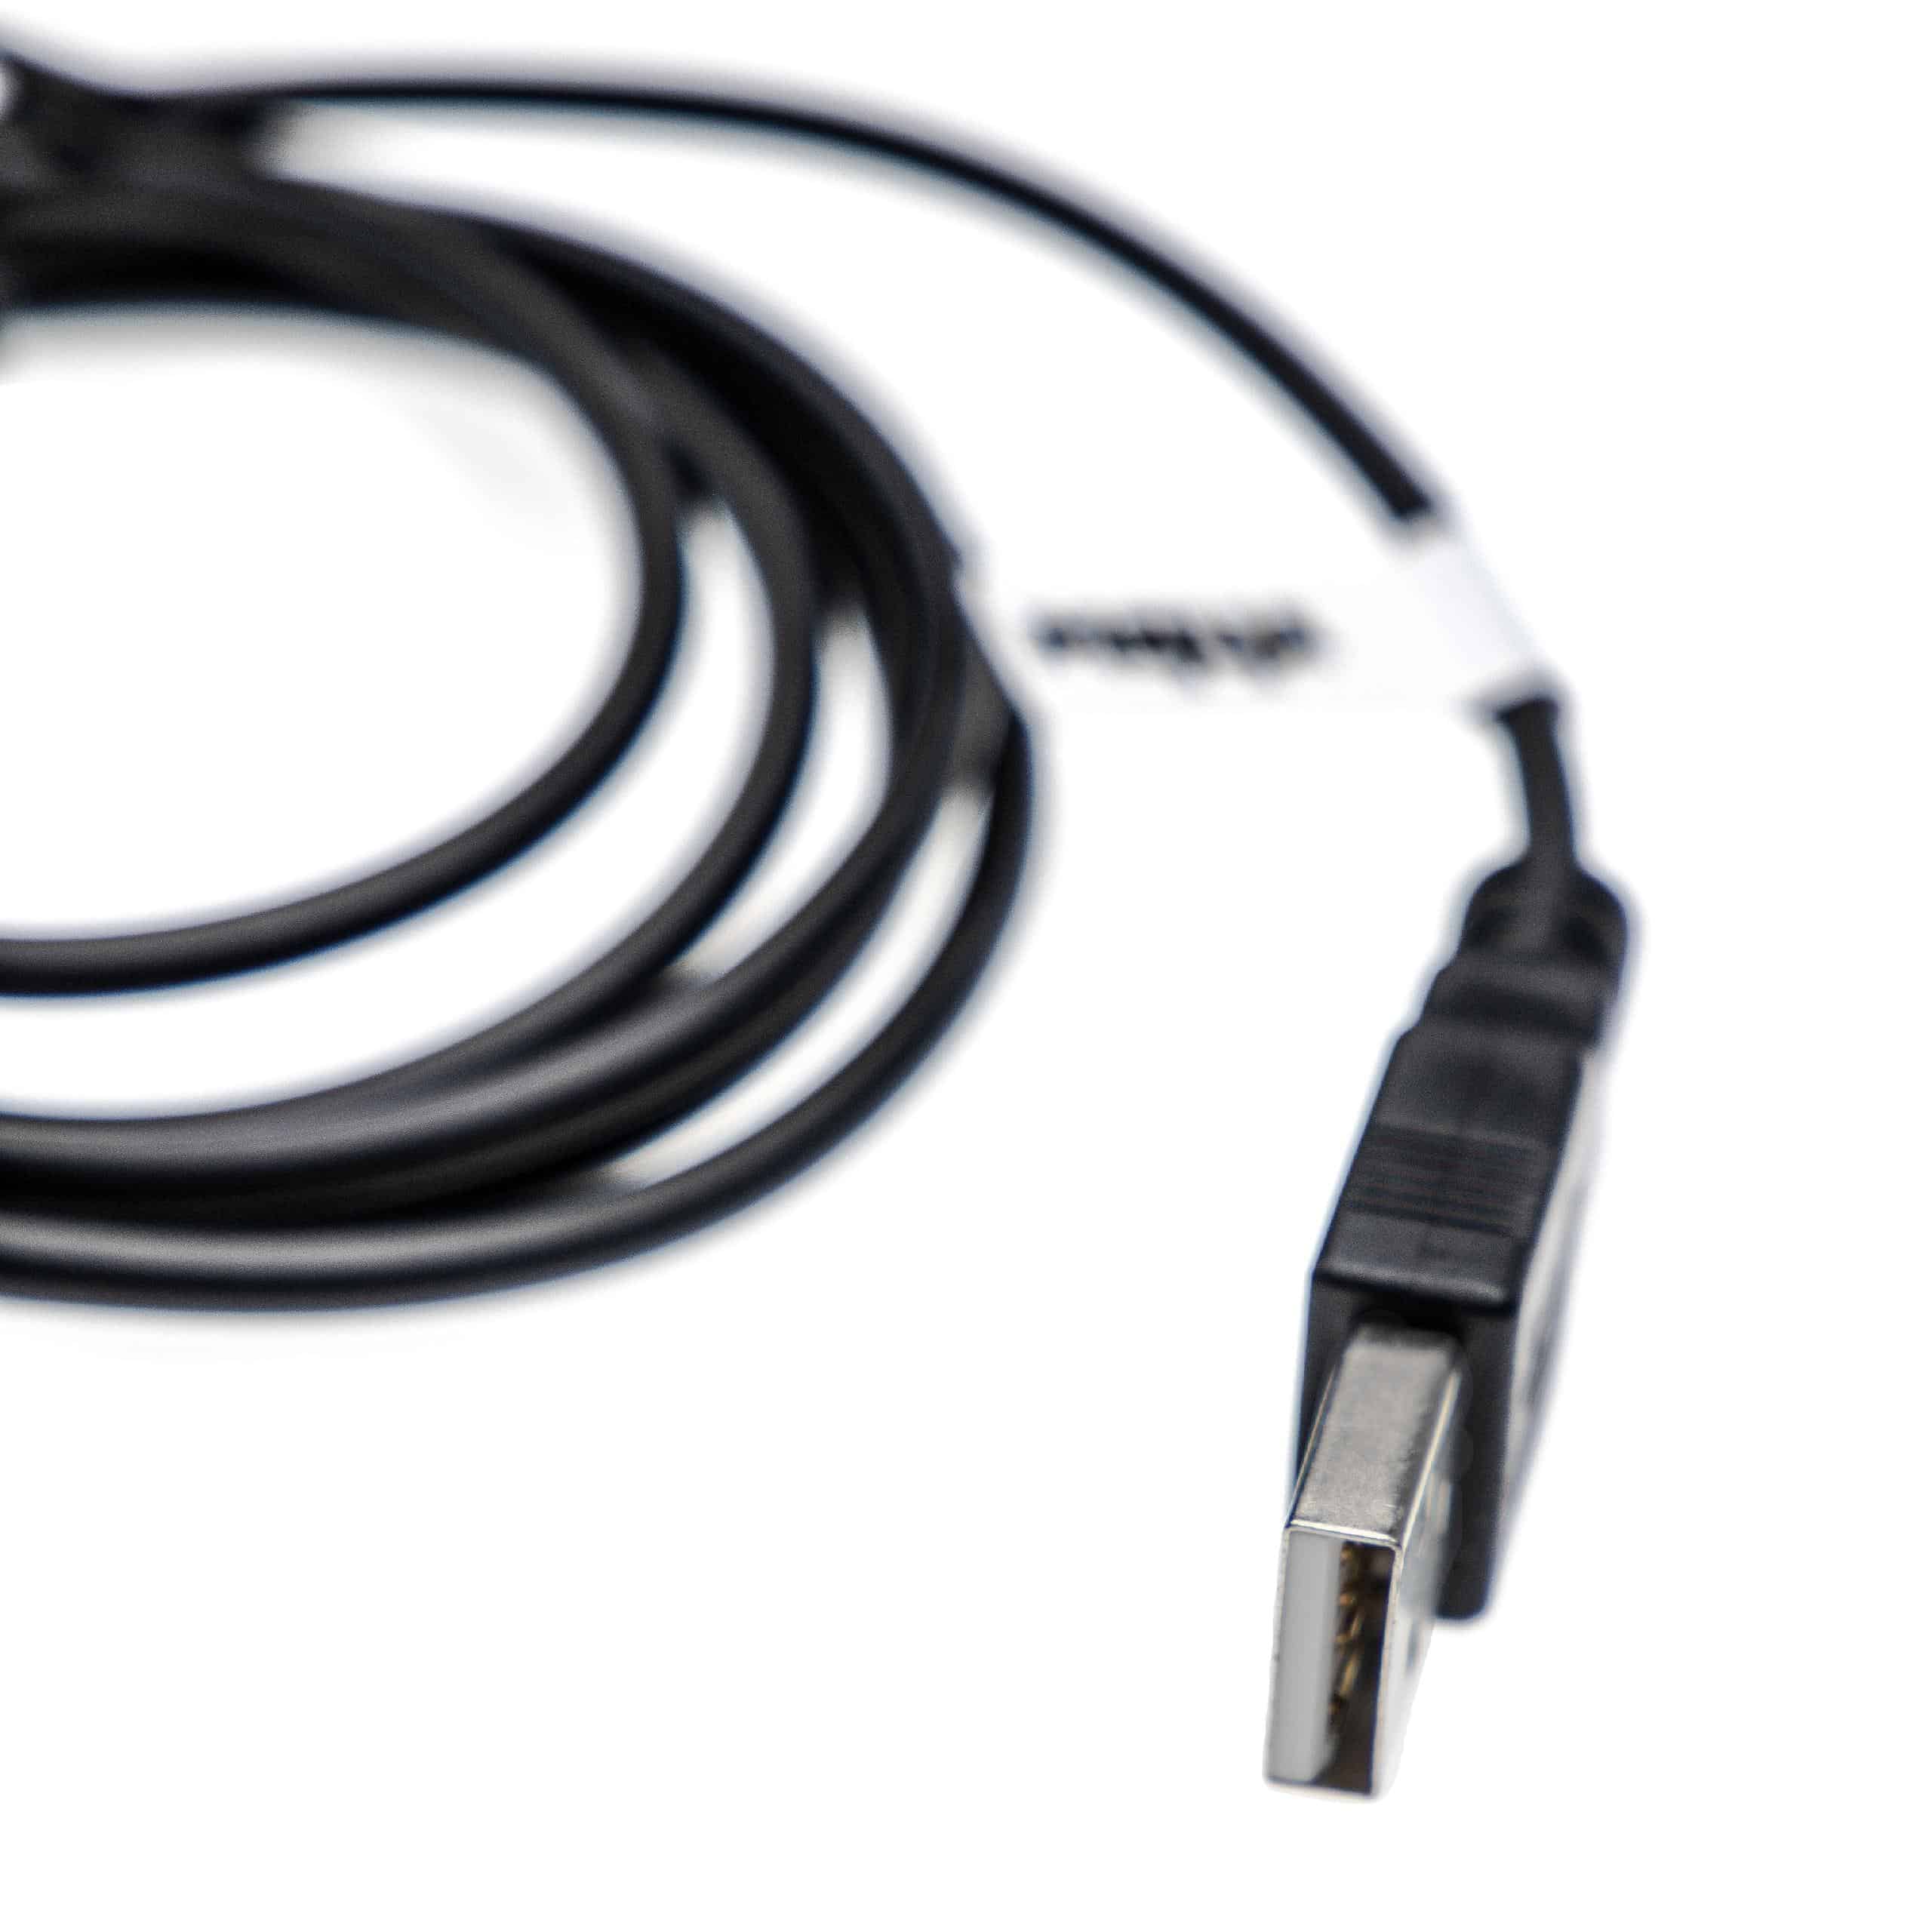 USB Charging Cable replaces Panasonic K2GHYYS00002 for Panasonic Camera, Video Camera, Camcorder - 1.2 m